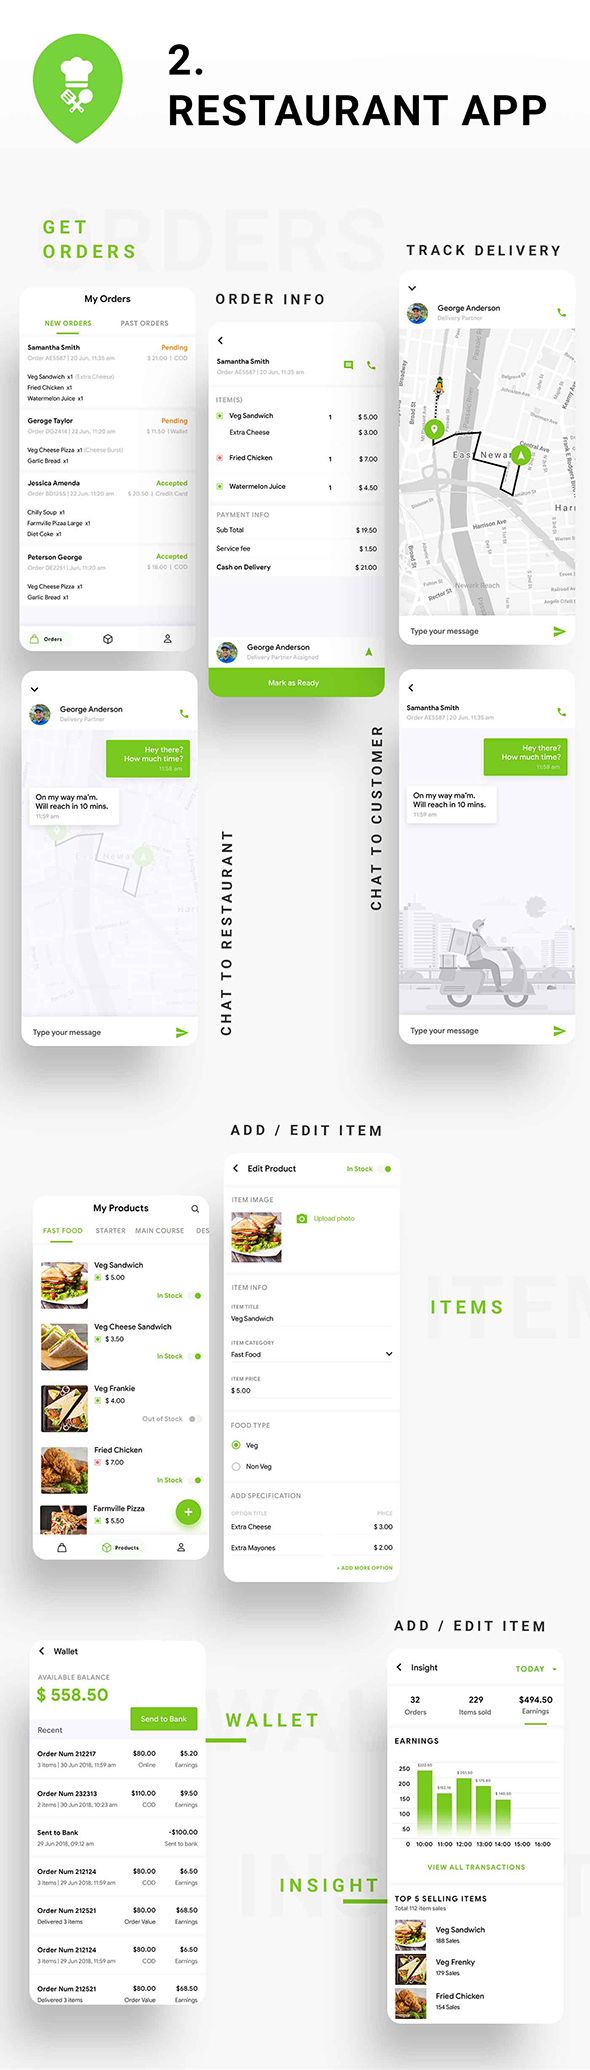 Multi Restaurant Food Ordering App | Food Delivery App | 3 Apps | Android + iOS App Template| Flutte - 4